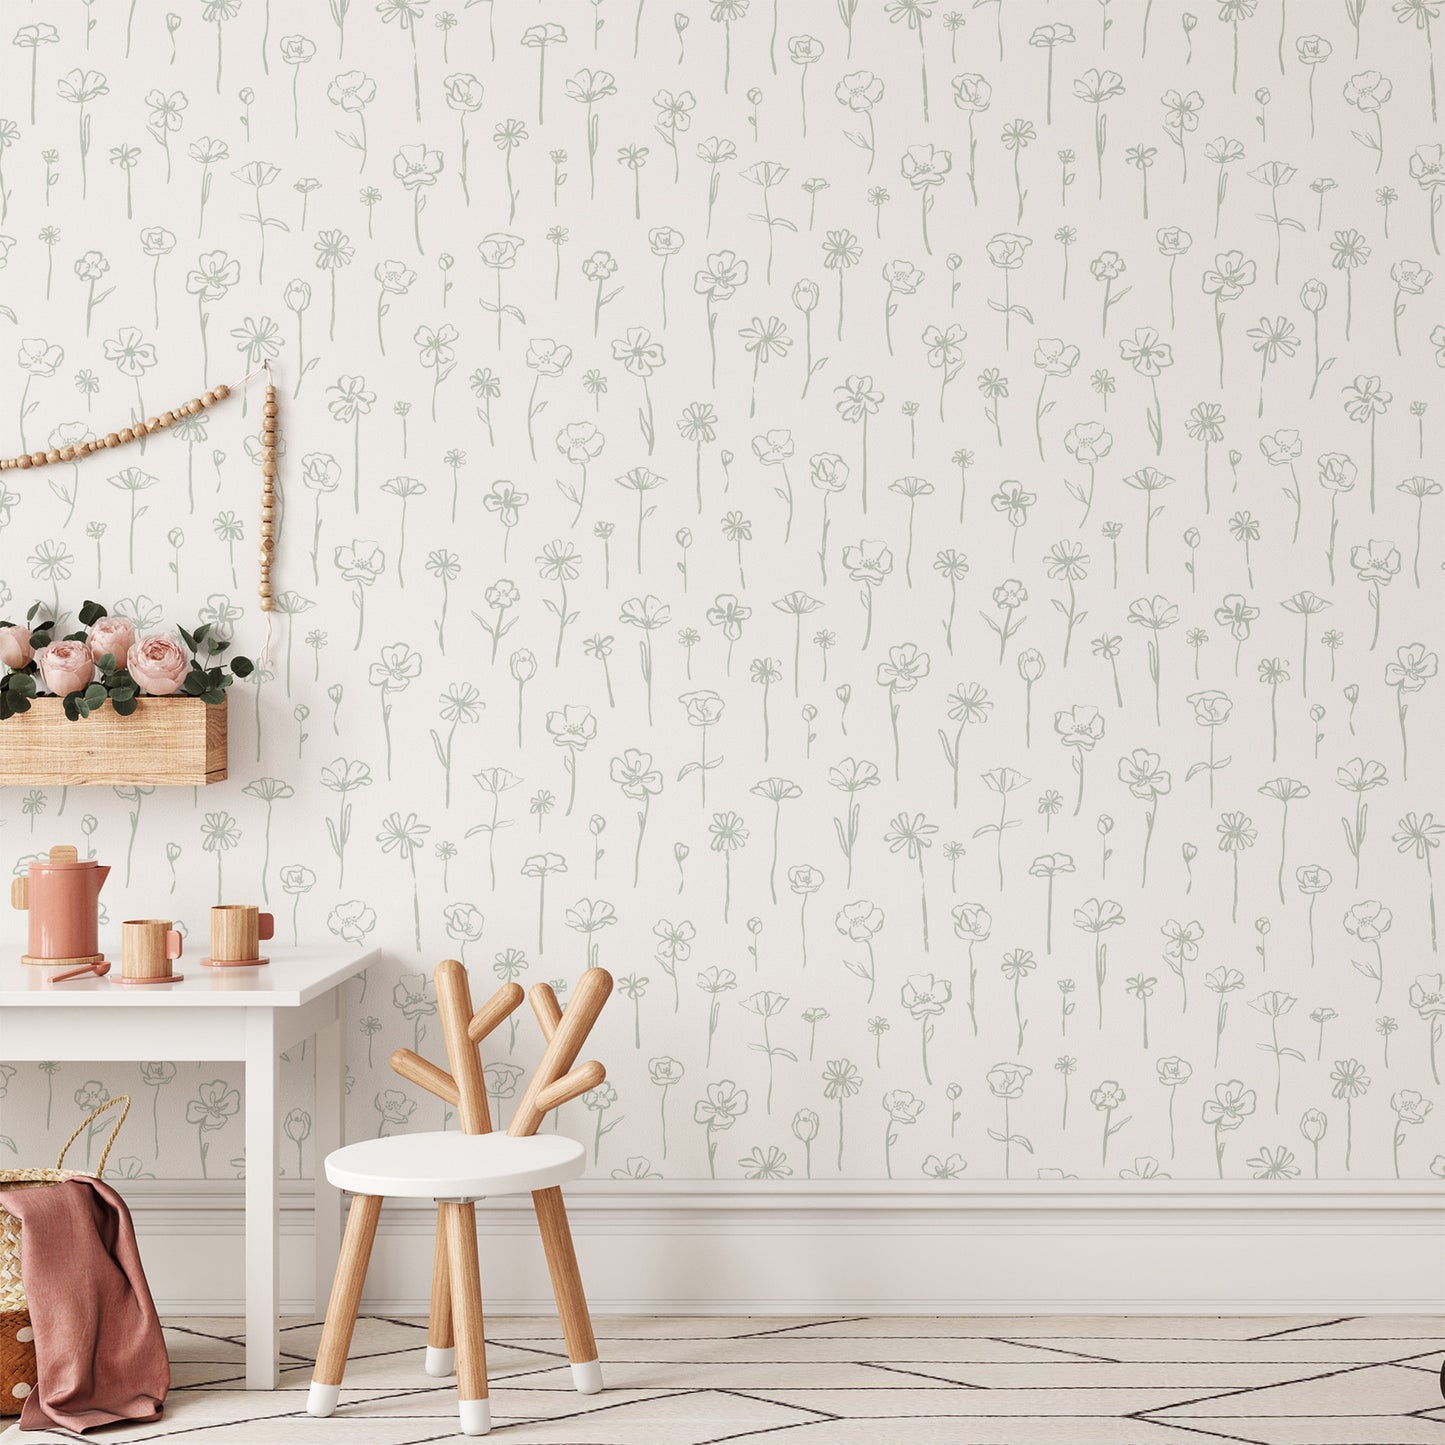 Wallpaper panel Nursery and Playroom featuring Lila's Floral Stems- a feminine dainty floral pattern